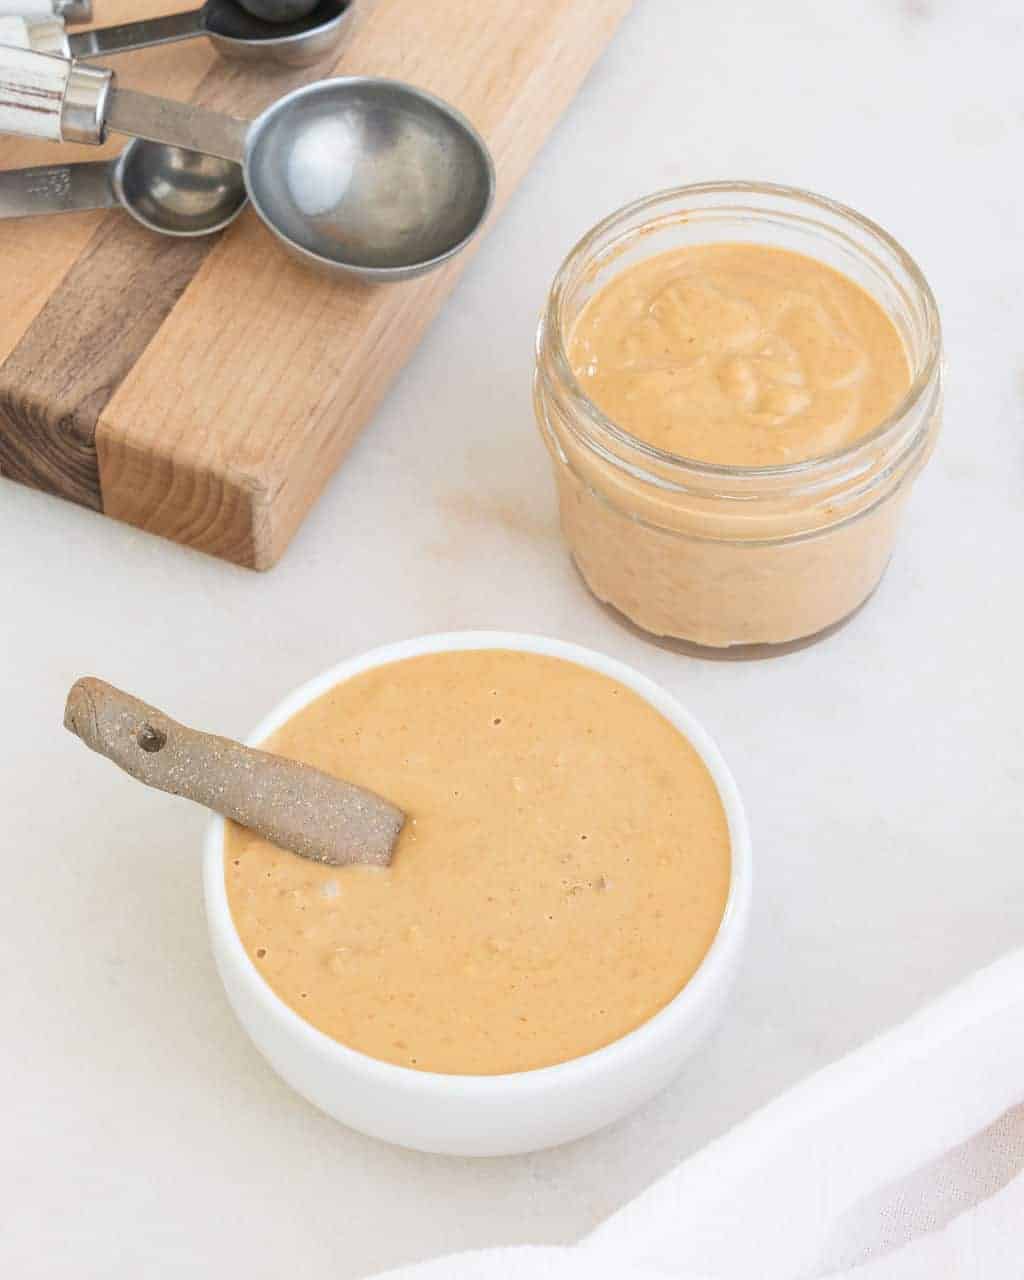 completed peanut sauce in a white bowl and small clear jar against light background